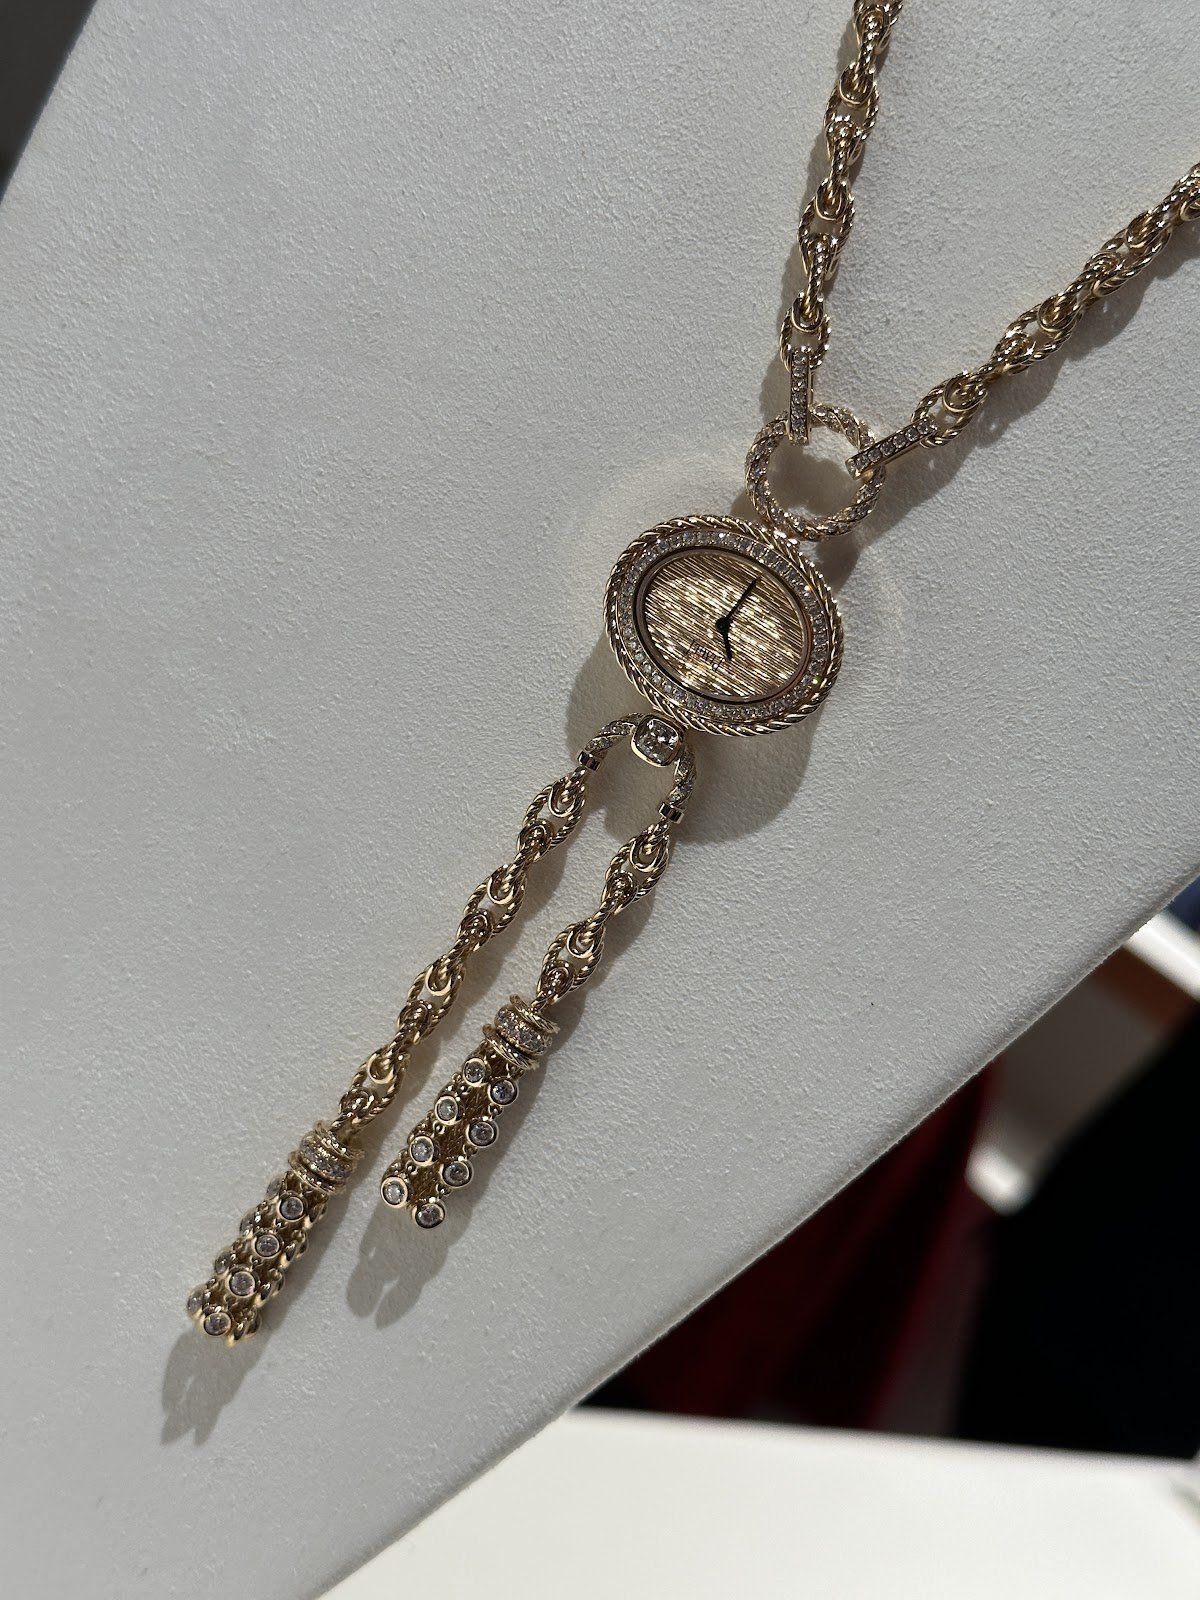 Necklace watch